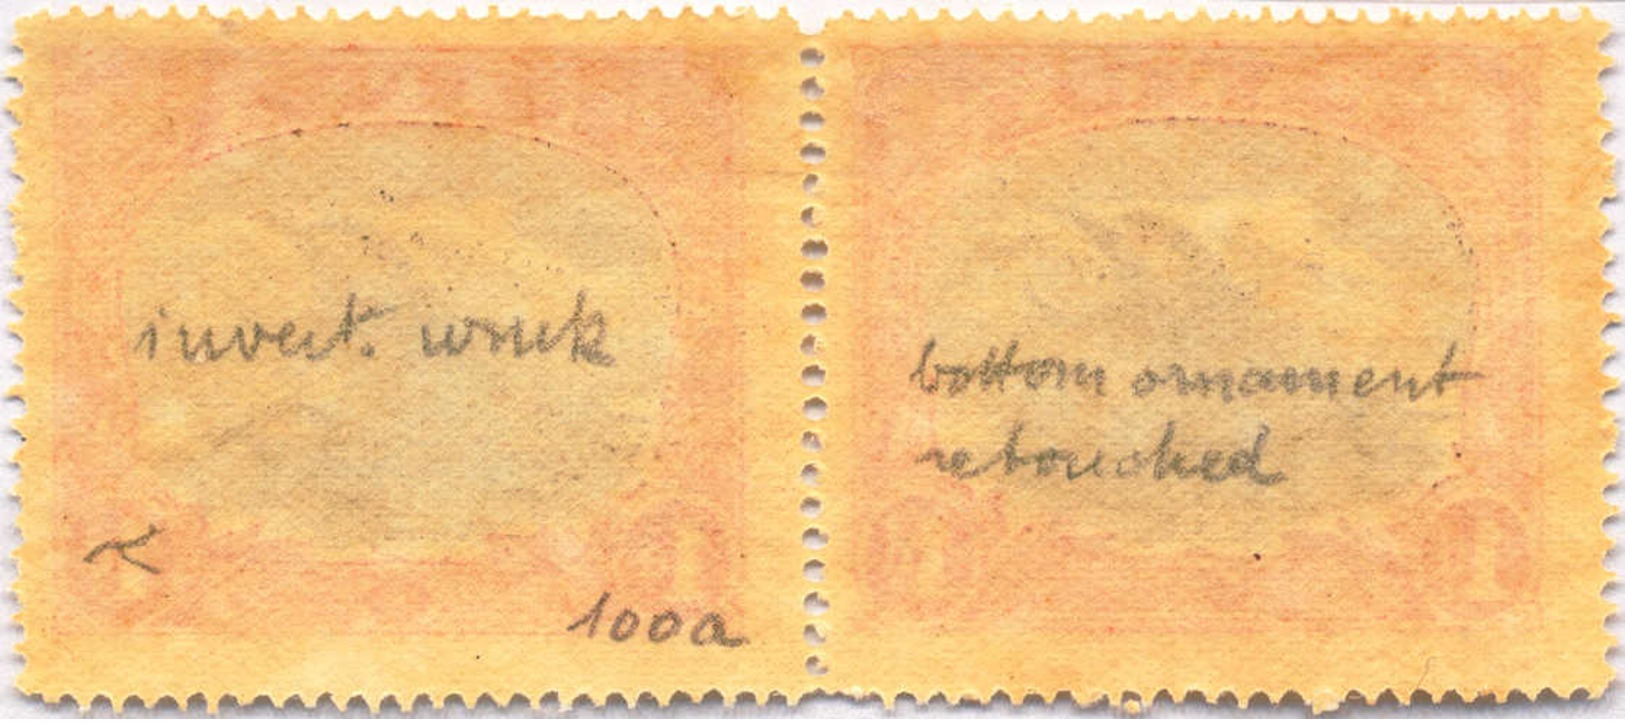 Pair 1916, 1 D., Pair, Black And Carmine-red, Substituted Cliche, Left Stamp - Bottom Ornament Retouched, Right Stamp -  - Papua-Neuguinea